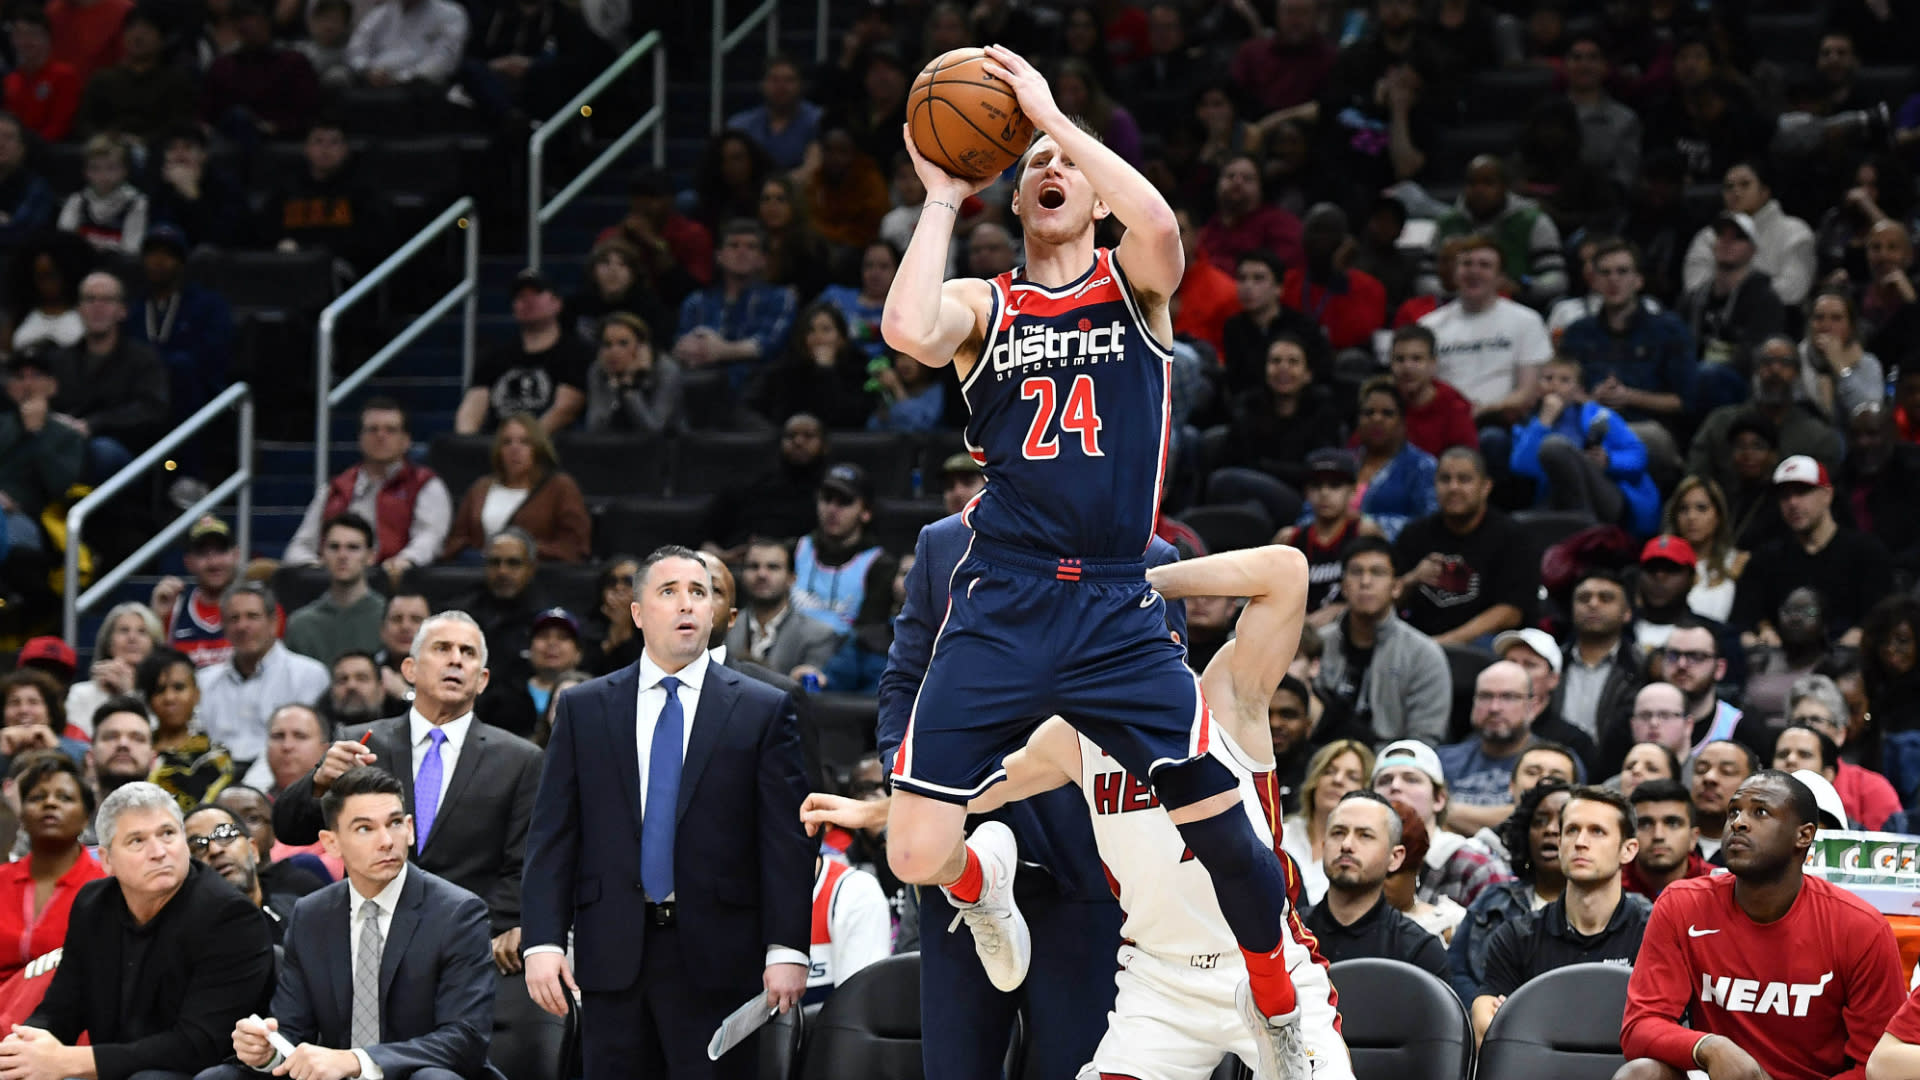 Garrison Mathews shows off his range in Wizards' loss to Blazers